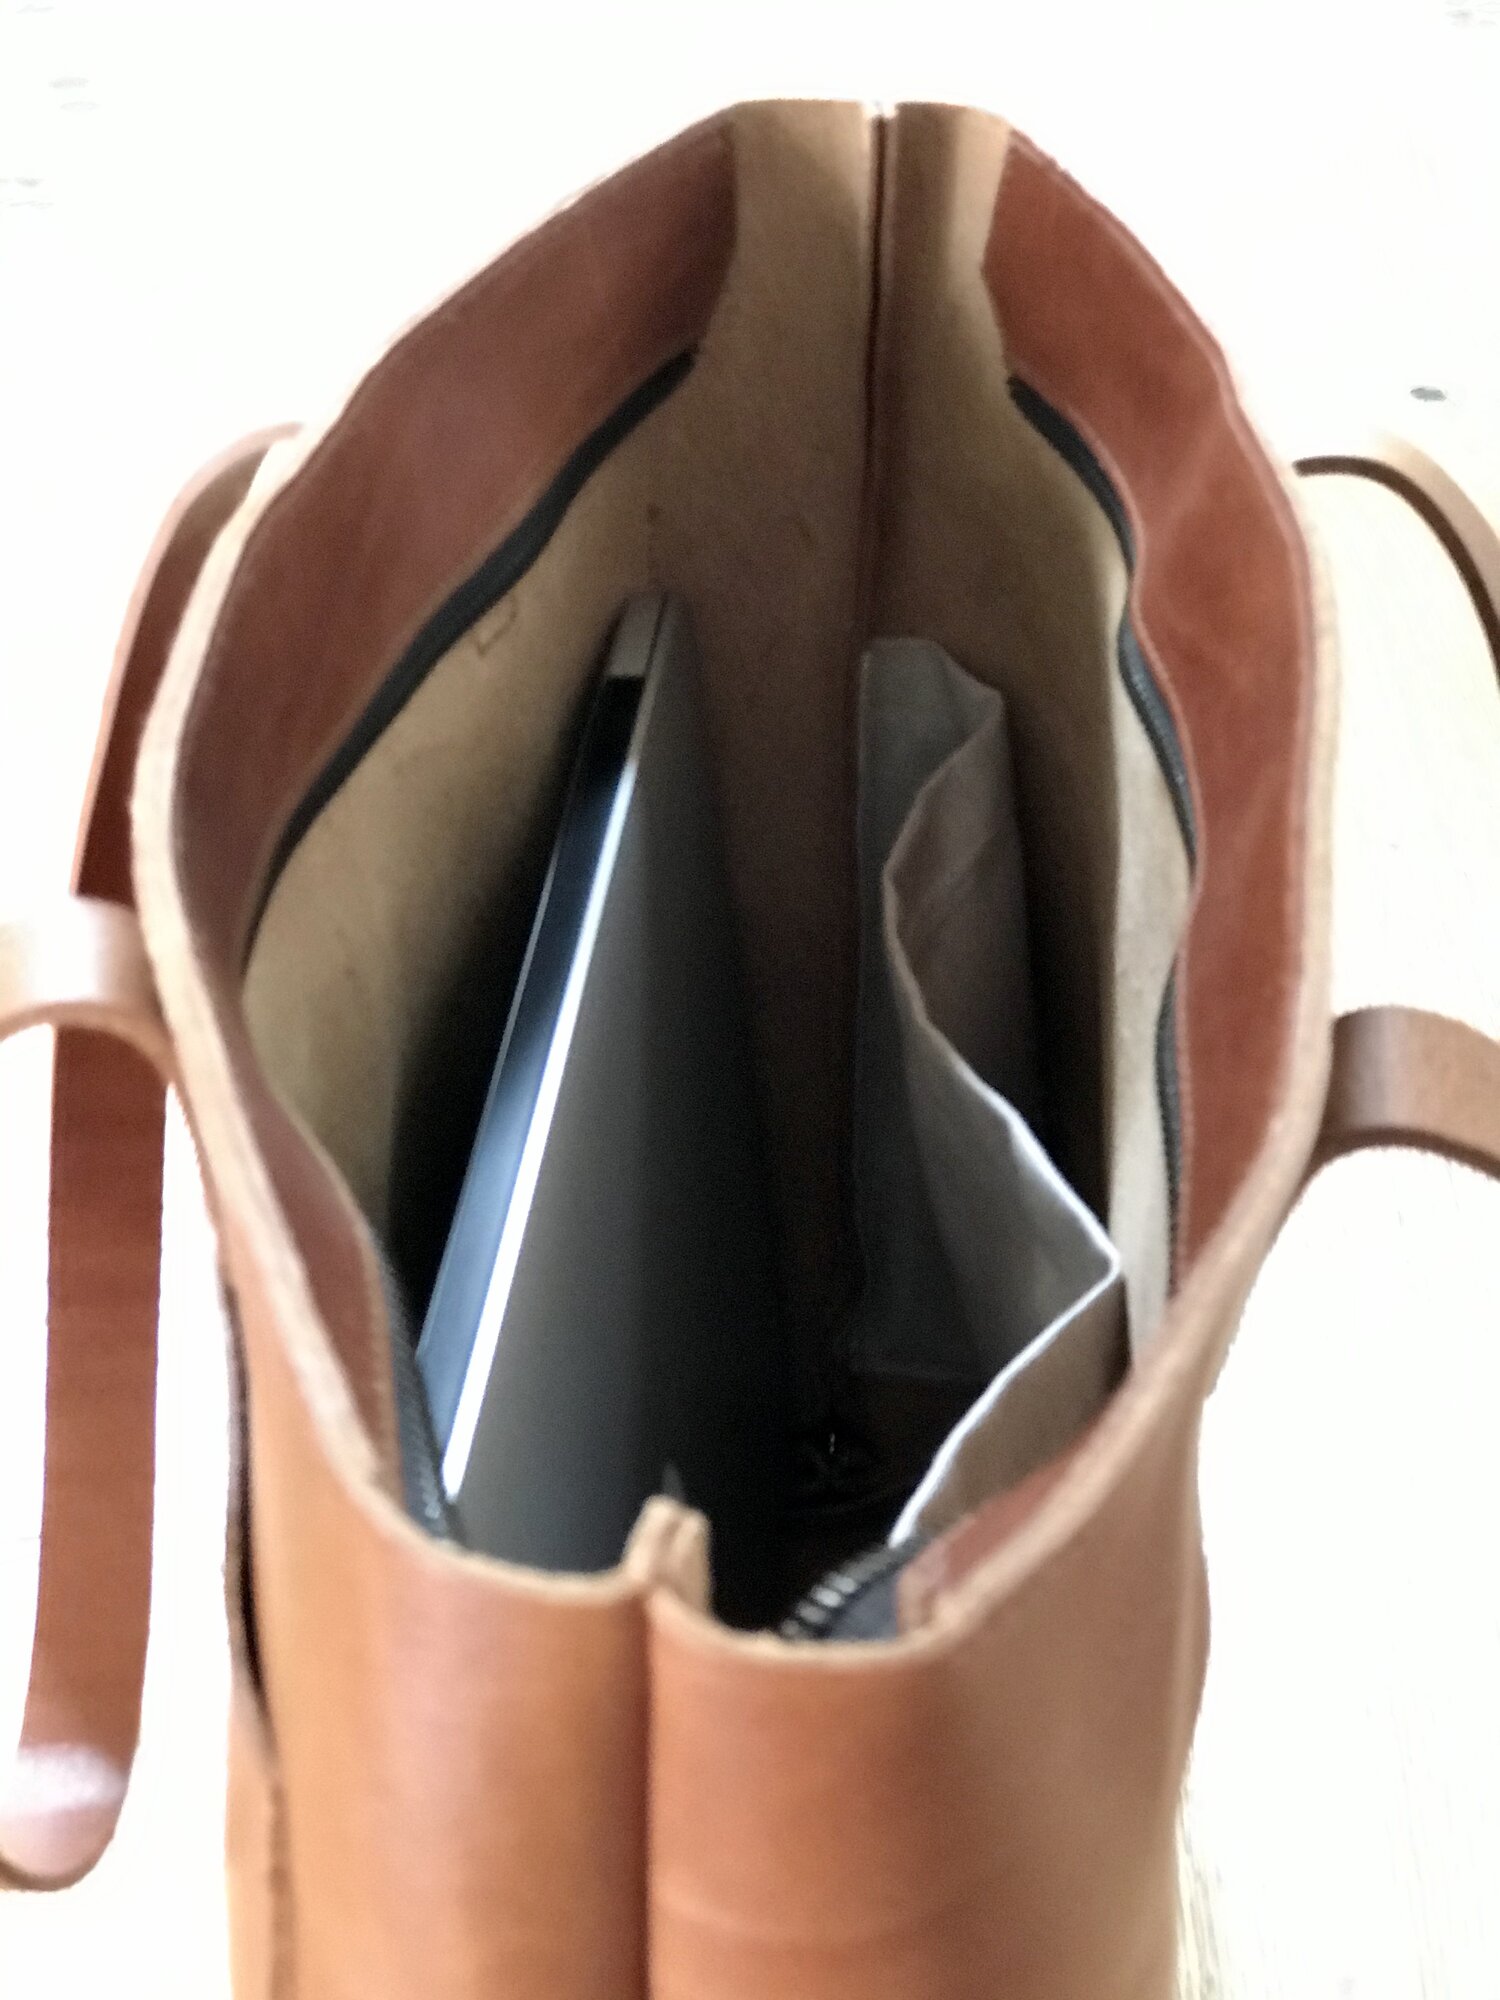 Formal Crossgrained Leather Tote Bag